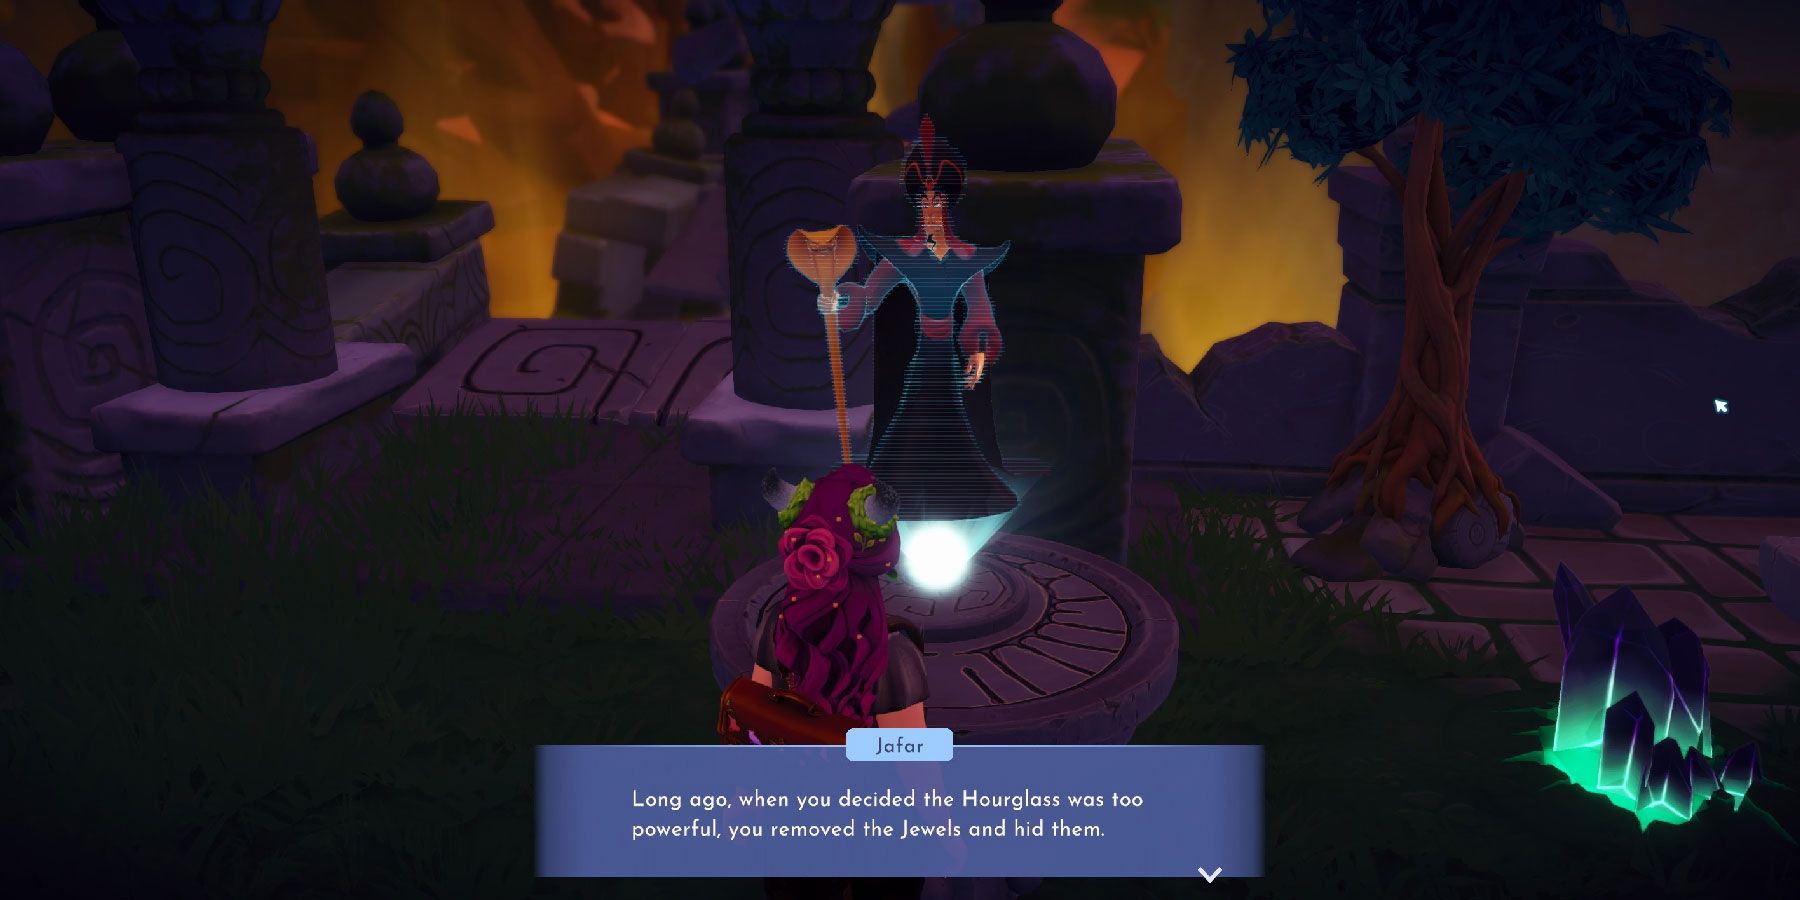 Speaking with Jafar for the quest The Sands in the Hourglass in Disney Dreamlight Valley.